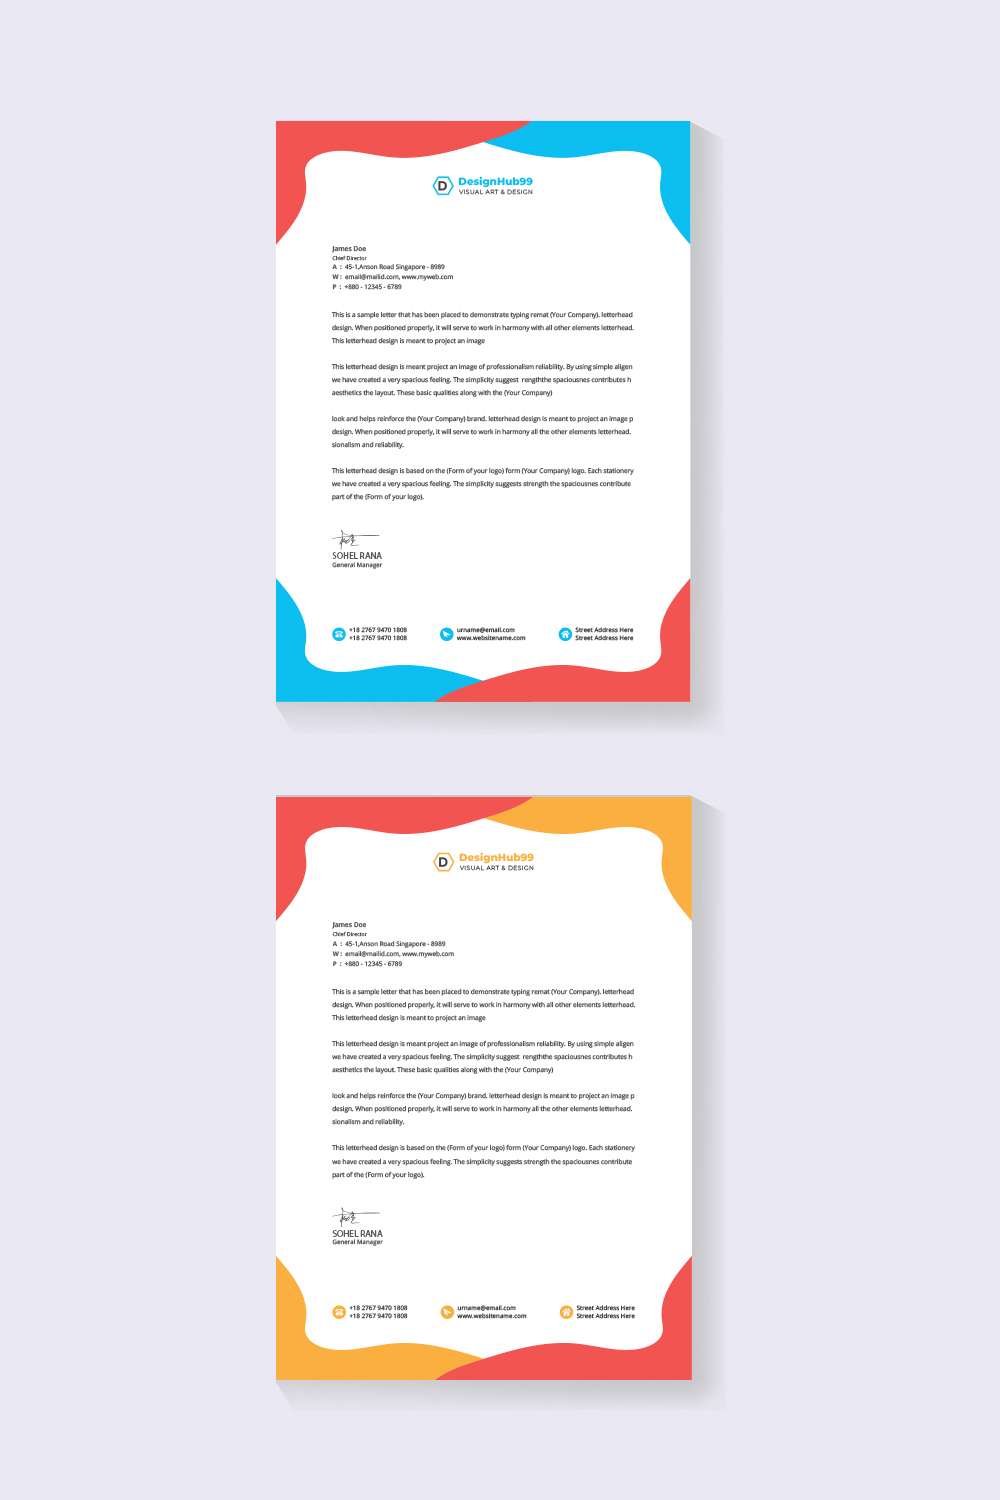 corporate business letterhead designYou will Get Features: -Editable Version -Used Free Commercial Font -Standard Quality Content -Print Ready Format -Template Size: A4 -High resolution 300 DPI -File: AI -Font: https://fontsgooglecom/specimen/Open+SansYou will Get Features: -Editable Version -Used Free Commercial Font -Standard Quality Content -Print Ready Format -Template Size: A4 -High resolution 300 DPI -File: AI -Font: https://fontsgooglecom/specimen/Open+SansYou will Get Features: -Editable Version -Used Free Commercial Font -Standard Quality Content -Print Ready Format -Template Size: A4 -High resolution 300 DPI -File: AI -Font: https://fontsgooglecom/specimen/Open+SansYou will Get Features: -Editable Version -Used Free Commercial Font -Standard Quality Content -Print Ready Format -Template Size: A4 -High resolution 300 DPI -File: AI -Font: https://fontsgooglecom/specimen/Open+SansYou will Get Features: -Editable Version -Used Free Commercial Font -Standard Quality Content -Print Ready Format -Template Size: A4 -High resolution 300 DPI -File: AI -Font: https://fontsgooglecom/specimen/Open+SansYou will Get Features: -Editable Version -Used Free Commercial Font -Standard Quality Content -Print Ready Format -Template Size: A4 -High resolution 300 DPI -File: AI -Font: https://fontsgooglecom/specimen/Open+SansYou will Get Features: -Editable Version -Used Free Commercial Font -Standard Quality Content -Print Ready Format -Template Size: A4 -High resolution 300 DPI -File: AI -Font: https://fontsgooglecom/specimen/Open+SansYou will Get Features: -Editable Version -Used Free Commercial Font -Standard Quality Content -Print Ready Format -Template Size: A4 -High resolution 300 DPI -File: AI -Font: https://fontsgooglecom/specimen/Open+SansYou will Get Features: -Editable Version -Used Free Commercial Font -Standard Quality Content -Print Ready Format -Template Size: A4 -High resolution 300 DPI -File: AI -Font: https://fontsgooglecom/specimen/Open+SansYou will Get Features: -Editable Version -Used Free Commercial Font -Standard Quality Content -Print Ready Format -Template Size: A4 -High resolution 300 DPI -File: AI -Font: https://fontsgooglecom/specimen/Open+SansYou will Get Features: -Editable Version -Used Free Commercial Font -Standard Quality Content -Print Ready Format -Template Size: A4 -High resolution 300 DPI -File: AI -Font: https://fontsgooglecom/specimen/Open+SansYou will Get Features: -Editable Version -Used Free Commercial Font -Standard Quality Content -Print Ready Format -Template Size: A4 -High resolution 300 DPI -File: AI -Font: https://fontsgooglecom/specimen/Open+SansYou will Get Features: -Editable Version -Used Free Commercial Font -Standard Quality Content -Print Ready Format -Template Size: A4 -High resolution 300 DPI -File: AI -Font: https://fontsgooglecom/specimen/Open+SansYou will Get Features: -Editable Version -Used Free Commercial Font -Standard Quality Content -Print Ready Format -Template Size: A4 -High resolution 300 DPI -File: AI -Font: https://fontsgooglecom/specimen/Open+SansYou will Get Features: -Editable Version -Used Free Commercial Font -Standard Quality Content -Print Ready Format -Template Size: A4 -High resolution 300 DPI -File: AI -Font: https://fontsgooglecom/specimen/Open+SansYou will Get Features: -Editable Version -Used Free Commercial Font -Standard Quality Content -Print Ready Format -Template Size: A4 -High resolution 300 DPI -File: AI -Font: https://fontsgooglecom/specimen/Open+SansYou will Get Features: -Editable Version -Used Free Commercial Font -Standard Quality Content -Print Ready Format -Template Size: A4 -High resolution 300 DPI -File: AI -Font: https://fontsgooglecom/specimen/Open+SansYou will Get Features: -Editable Version -Used Free Commercial Font -Standard Quality Content -Print Ready Format -Template Size: A4 -High resolution 300 DPI -File: AI -Font: https://fontsgooglecom/specimen/Open+SansYou will Get Features: -Editable Version -Used Free Commercial Font -Standard Quality Content -Print Ready Format -Template Size: A4 -High resolution 300 DPI -File: AI -Font: https://fontsgooglecom/specimen/Open+SansYou will Get Features: -Editable Version -Used Free Commercial Font -Standard Quality Content -Print Ready Format -Template Size: A4 -High resolution 300 DPI -File: AI -Font: https://fontsgooglecom/specimen/Open+SansYou will Get Features: -Editable Version -Used Free Commercial Font -Standard Quality Content -Print Ready Format -Template Size: A4 -High resolution 300 DPI -File: AI -Font: https://fontsgooglecom/specimen/Open+SansYou will Get Features: -Editable Version -Used Free Commercial Font -Standard Quality Content -Print Ready Format -Template Size: A4 -High resolution 300 DPI -File: AI -Font: https://fontsgooglecom/specimen/Open+SansYou will Get Features: -Editable Version -Used Free Commercial Font -Standard Quality Content -Print Ready Format -Template Size: A4 -High resolution 300 DPI -File: AI -Font: https://fontsgooglecom/specimen/Open+SansYou will Get Features: -Editable Version -Used Free Commercial Font -Standard Quality Content -Print Ready Format -Template Size: A4 -High resolution 300 DPI -File: AI -Font: https://fontsgooglecom/specimen/Open+SansYou will Get Features: -Editable Version -Used Free Commercial Font -Standard Quality Content -Print Ready Format -Template Size: A4 -High resolution 300 DPI -File: AI -Font: https://fontsgooglecom/specimen/Open+SansYou will Get Features: -Editable Version -Used Free Commercial Font -Standard Quality Content -Print Ready Format -Template Size: A4 -High resolution 300 DPI -File: AI -Font: https://fontsgooglecom/specimen/Open+SansYou will Get Features: -Editable Version -Used Free Commercial Font -Standard Quality Content -Print Ready Format -Template Size: A4 -High resolution 300 DPI -File: AI -Font: https://fontsgooglecom/specimen/Open+SansYou will Get Features: -Editable Version -Used Free Commercial Font -Standard Quality Content -Print Ready Format -Template Size: A4 -High resolution 300 DPI -File: AI -Font: https://fontsgooglecom/specimen/Open+SansYou will Get Features: -Editable Version -Used Free Commercial Font -Standard Quality Content -Print Ready Format -Template Size: A4 -High resolution 300 DPI -File: AI -Font: https://fontsgooglecom/specimen/Open+SansYou will Get Features: -Editable Version -Used Free Commercial Font -Standard Quality Content -Print Ready Format -Template Size: A4 -High resolution 300 DPI -File: AI -Font: https://fontsgooglecom/specimen/Open+SansYou will Get Features: -Editable Version -Used Free Commercial Font -Standard Quality Content -Print Ready Format -Template Size: A4 -High resolution 300 DPI -File: AI -Font: https://fontsgooglecom/specimen/Open+SansYou will Get Features: -Editable Version -Used Free Commercial Font -Standard Quality Content -Print Ready Format -Template Size: A4 -High resolution 300 DPI -File: AI -Font: https://fontsgooglecom/specimen/Open+SansYou will Get Features: -Editable Version -Used Free Commercial Font -Standard Quality Content -Print Ready Format -Template Size: A4 -High resolution 300 DPI -File: AI -Font: https://fontsgooglecom/specimen/Open+SansYou will Get Features: -Editable Version -Used Free Commercial Font -Standard Quality Content -Print Ready Format -Template Size: A4 -High resolution 300 DPI -File: AI -Font: https://fontsgooglecom/specimen/Open+SansYou will Get Features: -Editable Version -Used Free Commercial Font -Standard Quality Content -Print Ready Format -Template Size: A4 -High resolution 300 DPI -File: AI -Font: https://fontsgooglecom/specimen/Open+SansYou will Get Features: -Editable Version -Used Free Commercial Font -Standard Quality Content -Print Ready Format -Template Size: A4 -High resolution 300 DPI -File: AI -Font: https://fontsgooglecom/specimen/Open+SansYou will Get Features: -Editable Version -Used Free Commercial Font -Standard Quality Content -Print Ready Format -Template Size: A4 -High resolution 300 DPI -File: AI -Font: https://fontsgooglecom/specimen/Open+SansYou will Get Features: -Editable Version -Used Free Commercial Font -Standard Quality Content -Print Ready Format -Template Size: A4 -High resolution 300 DPI -File: AI -Font: https://fontsgooglecom/specimen/Open+SansYou will Get Features: -Editable Version -Used Free Commercial Font -Standard Quality Content -Print Ready Format -Template Size: A4 -High resolution 300 DPI -File: AI -Font: https://fontsgooglecom/specimen/Open+SansYou will Get Features: -Editable Version -Used Free Commercial Font -Standard Quality Content -Print Ready Format -Template Size: A4 -High resolution 300 DPI -File: AI -Font: https://fontsgooglecom/specimen/Open+SansYou will Get Features: -Editable Version -Used Free Commercial Font -Standard Quality Content -Print Ready Format -Template Size: A4 -High resolution 300 DPI -File: AI -Font: https://fontsgooglecom/specimen/Open+SansYou will Get Features: -Editable Version -Used Free Commercial Font -Standard Quality Content -Print Ready Format -Template Size: A4 -High resolution 300 DPI -File: AI -Font: https://fontsgooglecom/specimen/Open+SansYou will Get Features: -Editable Version -Used Free Commercial Font -Standard Quality Content -Print Ready Format -Template Size: A4 -High resolution 300 DPI -File: AI -Font: https://fontsgooglecom/specimen/Open+SansYou will Get Features: -Editable Version -Used Free Commercial Font -Standard Quality Content -Print Ready Format -Template Size: A4 -High resolution 300 DPI -File: AI -Font: https://fontsgooglecom/specimen/Open+SansYou will Get Features: -Editable Version -Used Free Commercial Font -Standard Quality Content -Print Ready Format -Template Size: A4 -High resolution 300 DPI -File: AI -Font: https://fontsgooglecom/specimen/Open+SansYou will Get Features: -Editable Version -Used Free Commercial Font -Standard Quality Content -Print Ready Format -Template Size: A4 -High resolution 300 DPI -File: AI -Font: https://fontsgooglecom/specimen/Open+SansYou will Get Features: -Editable Version -Used Free Commercial Font -Standard Quality Content -Print Ready Format -Template Size: A4 -High resolution 300 DPI -File: AI -Font: https://fontsgooglecom/specimen/Open+SansYou will Get Features: -Editable Version -Used Free Commercial Font -Standard Quality Content -Print Ready Format -Template Size: A4 -High resolution 300 DPI -File: AI -Font: https://fontsgooglecom/specimen/Open+SansYou will Get Features: -Editable Version -Used Free Commercial Font -Standard Quality Content -Print Ready Format -Template Size: A4 -High resolution 300 DPI -File: AI -Font: https://fontsgooglecom/specimen/Open+SansYou will Get Features: -Editable Version -Used Free Commercial Font -Standard Quality Content -Print Ready Format -Template Size: A4 -High resolution 300 DPI -File: AI -Font: https://fontsgooglecom/specimen/Open+SansYou will Get Features: -Editable Version -Used Free Commercial Font -Standard Quality Content -Print Ready Format -Template Size: A4 -High resolution 300 DPI -File: AI -Font: https://fontsgooglecom/specimen/Open+Sans pinterest preview image.